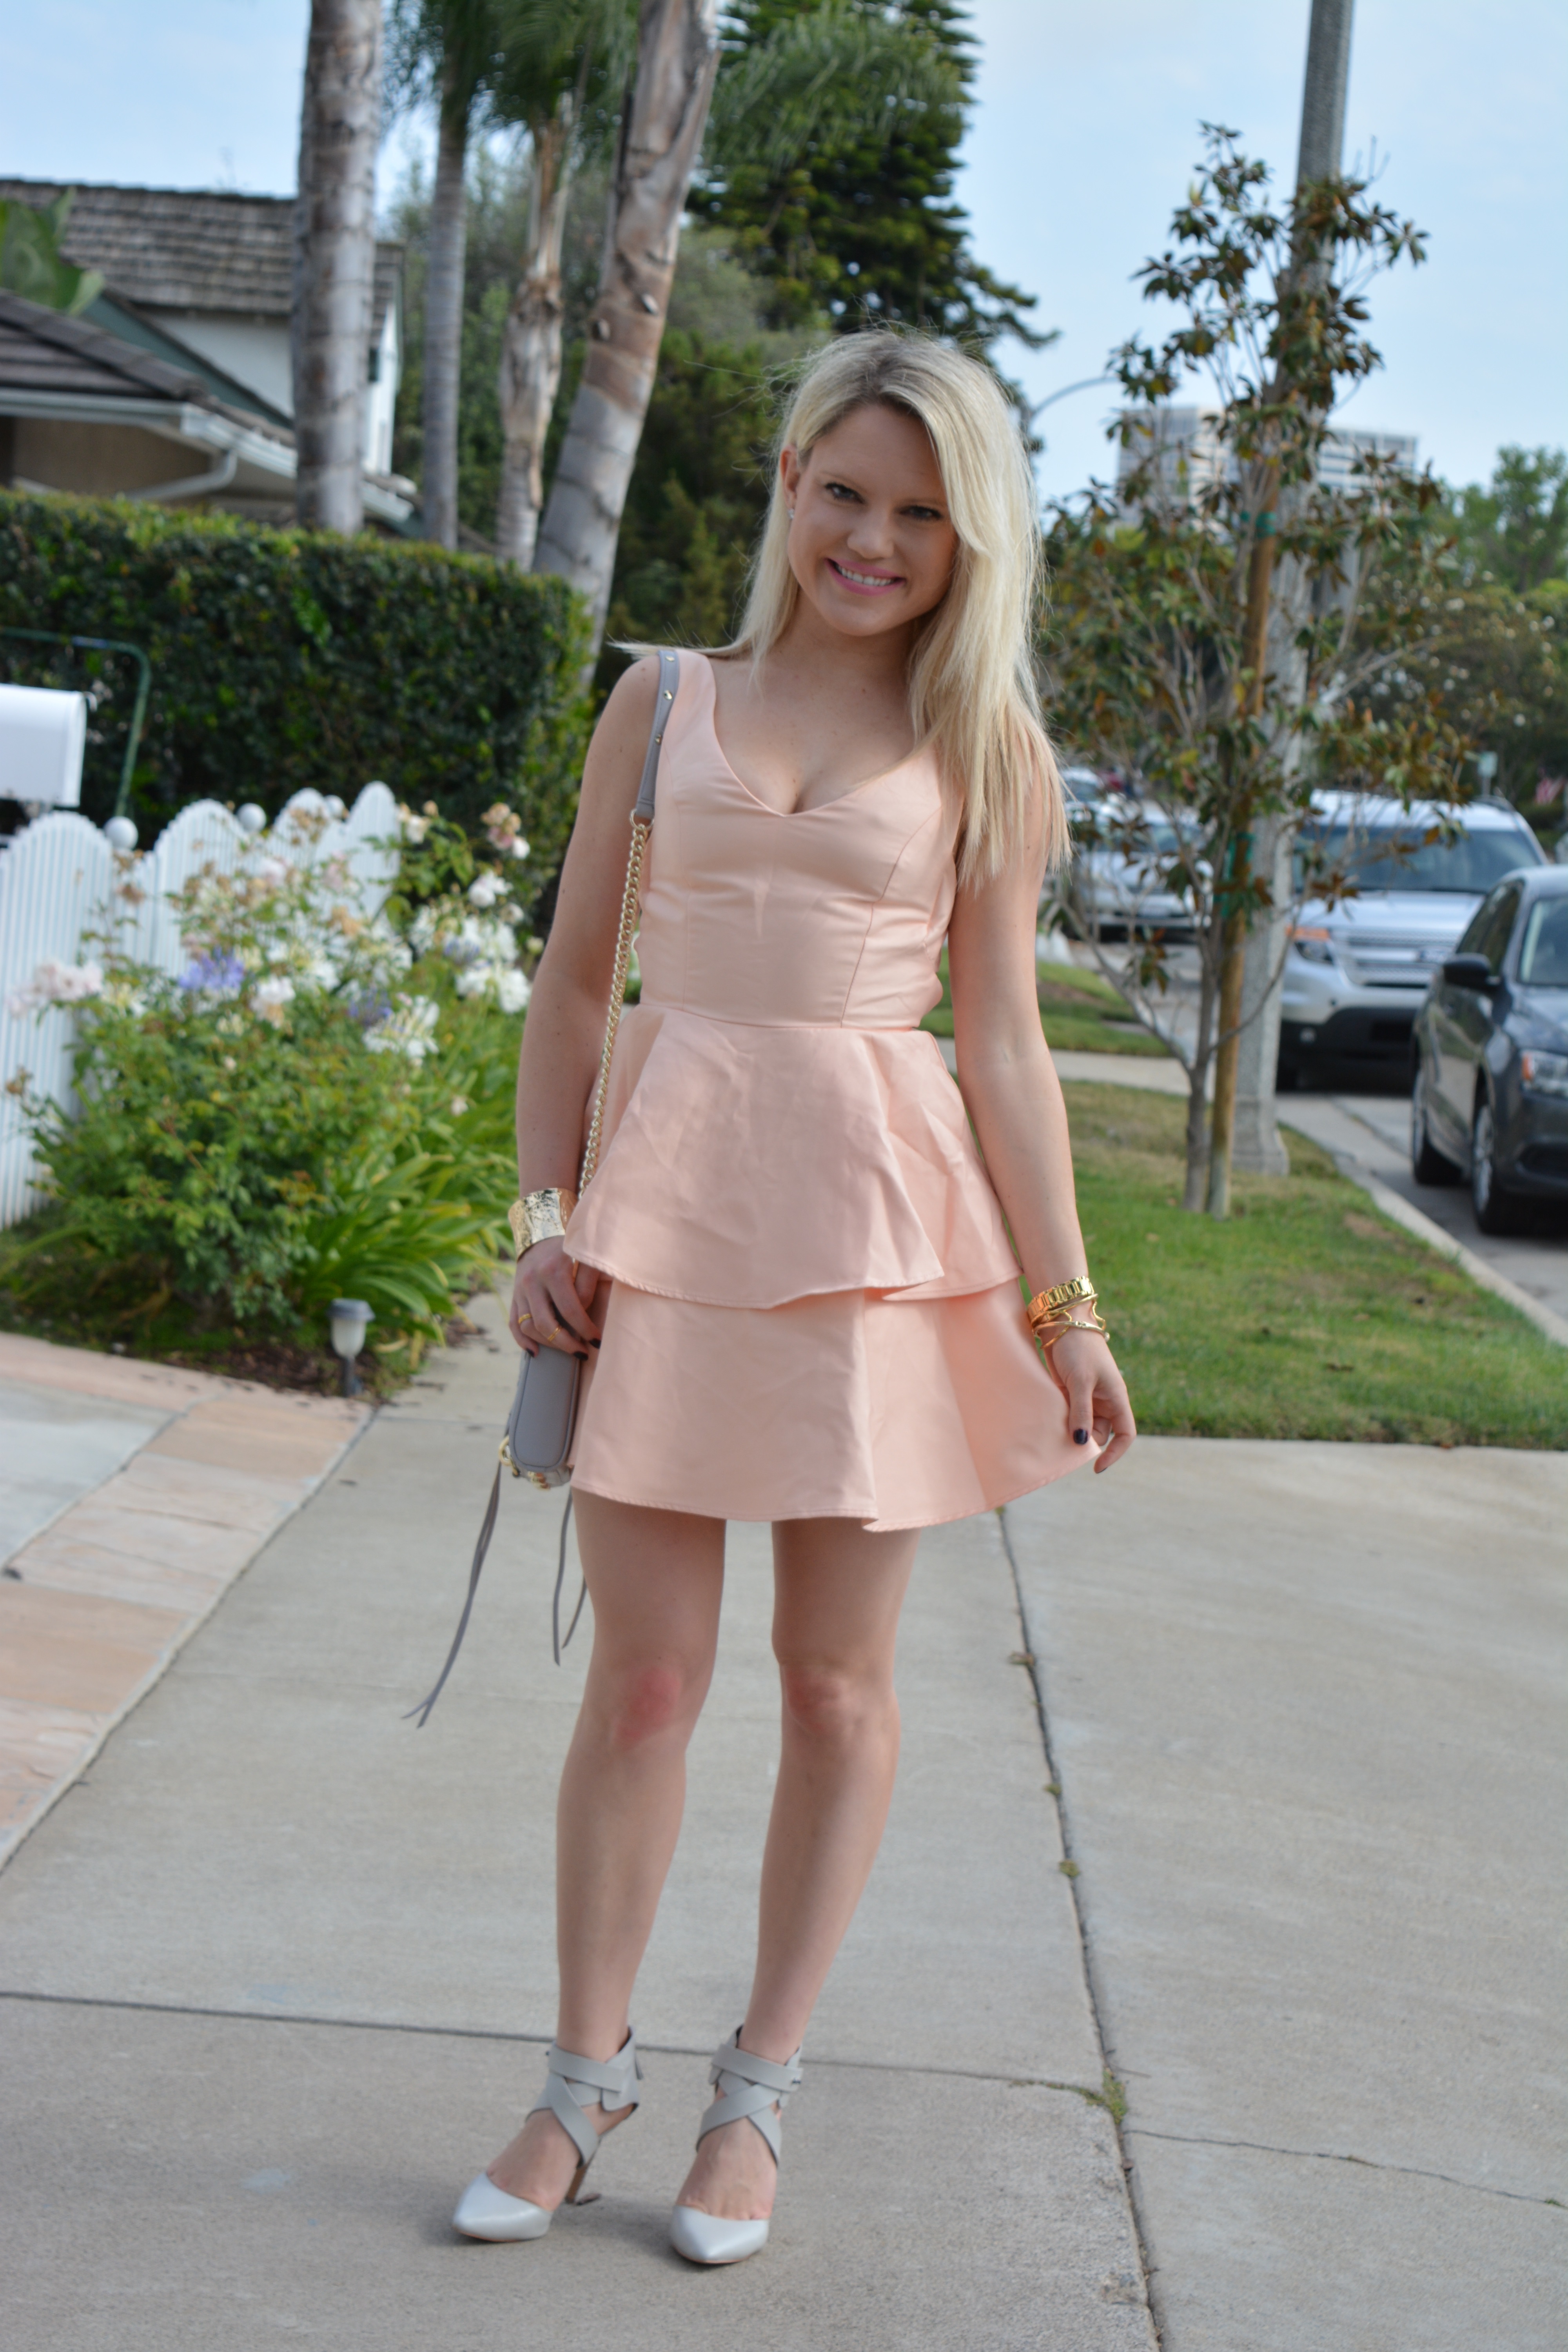 Peach and grey outfit | Styled American